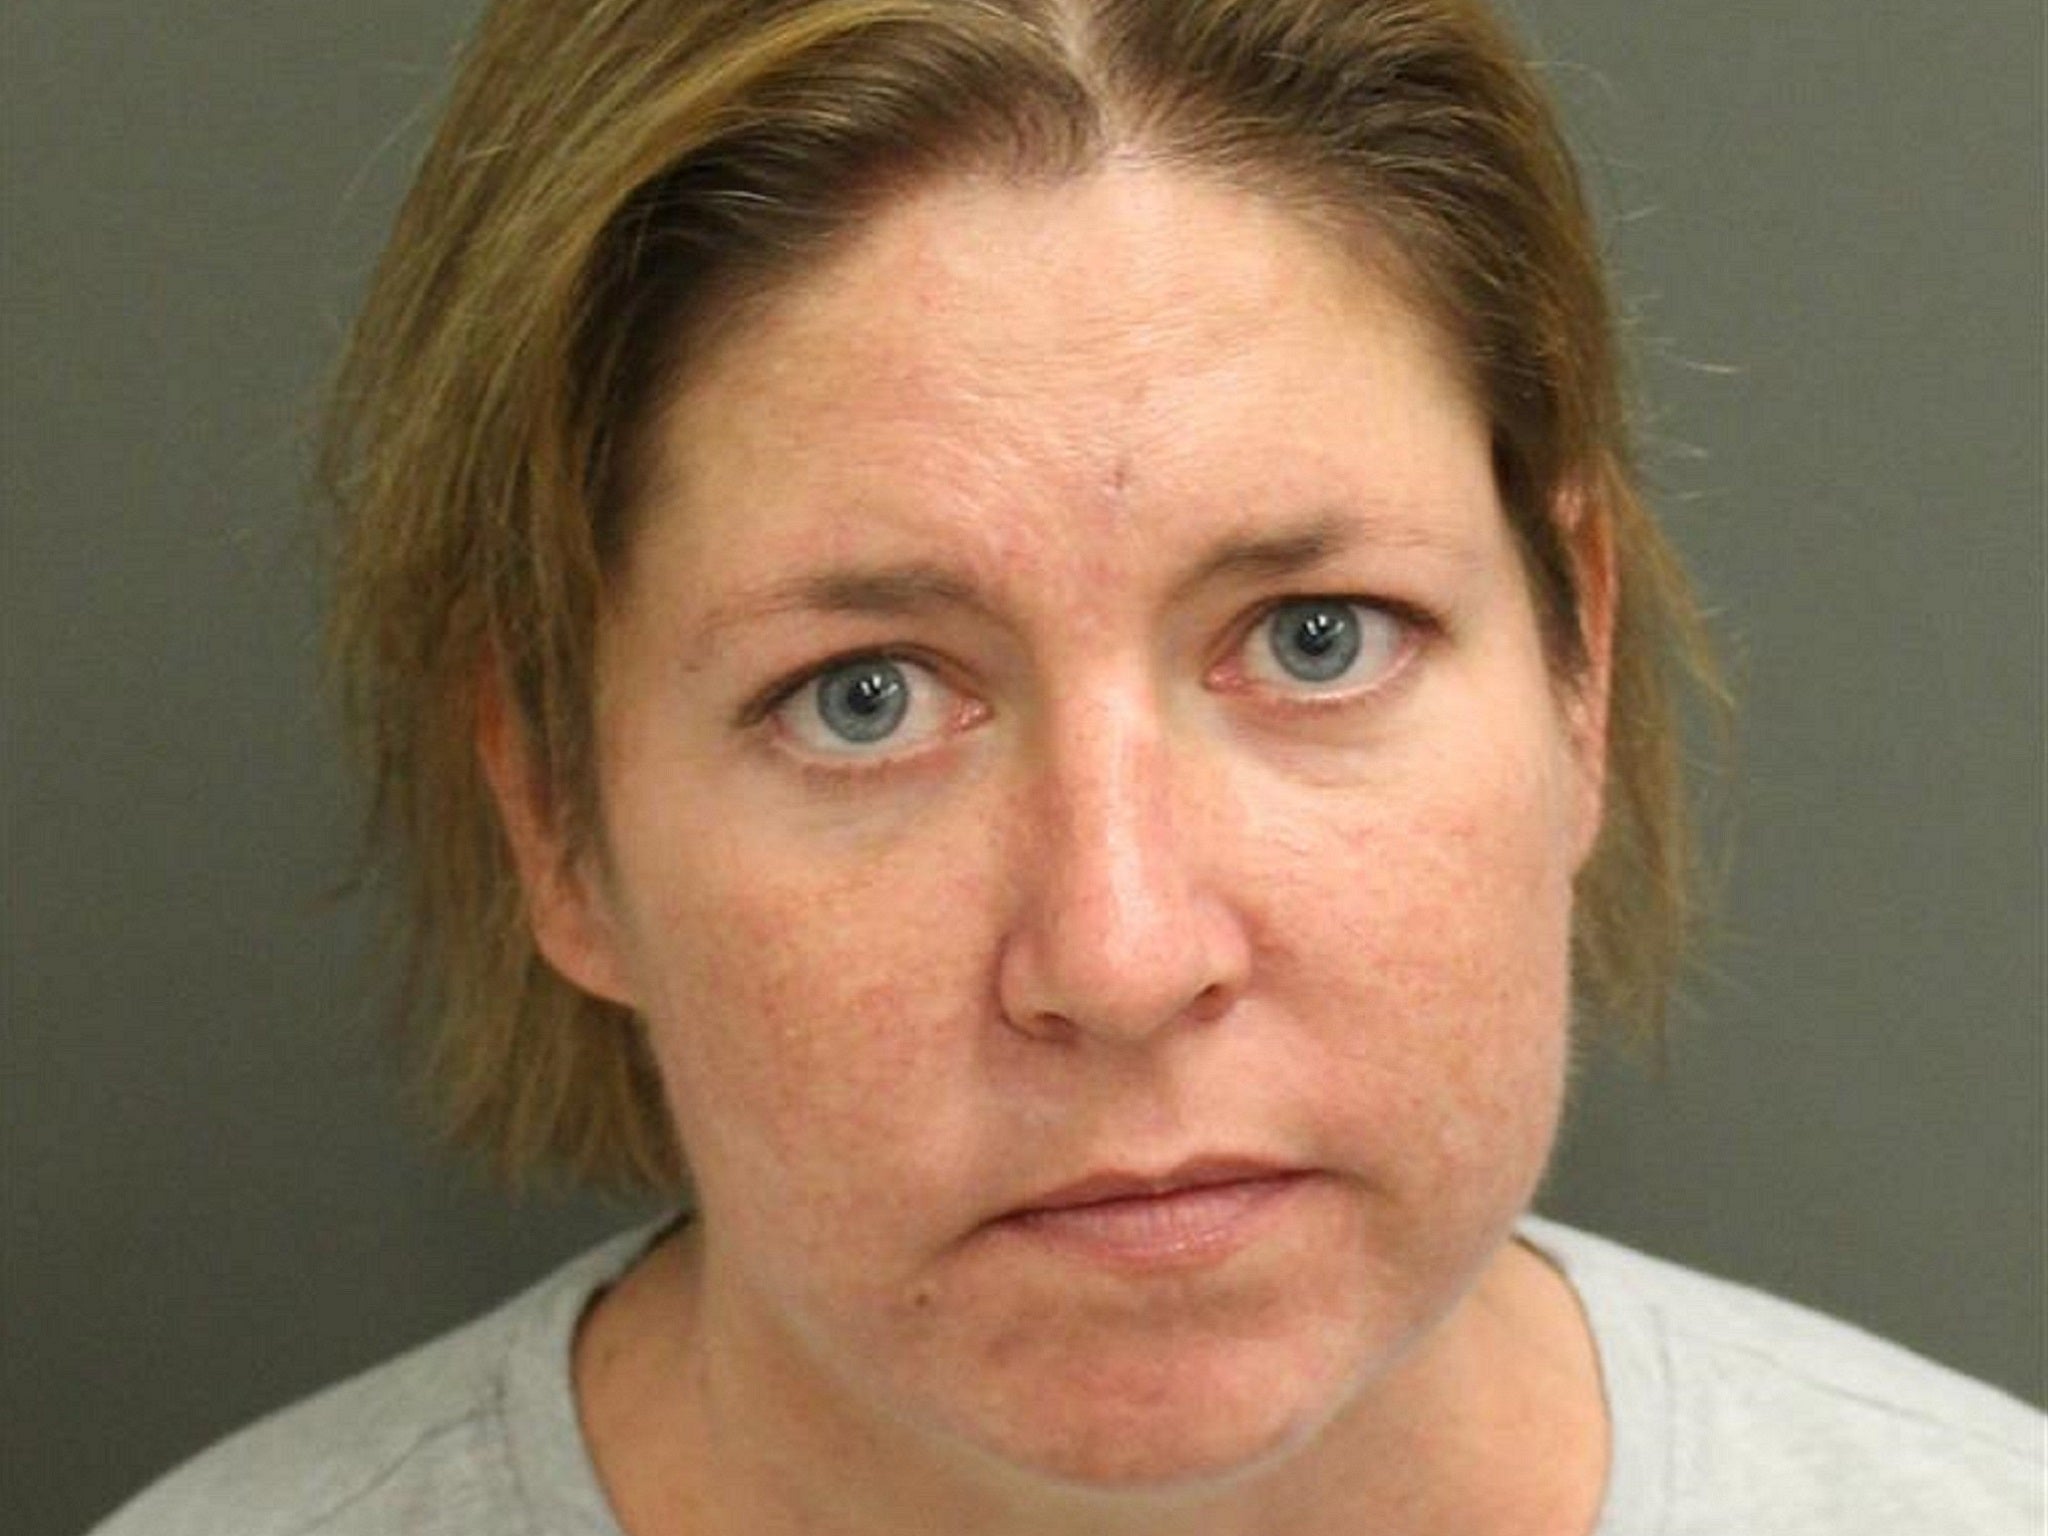 Sarah Boone, 46, of Winter Park, Florida, has been charged with second-degree murder after allegedly zipping her boyfriend Jorge Torres in a suitcase and leaving him to die